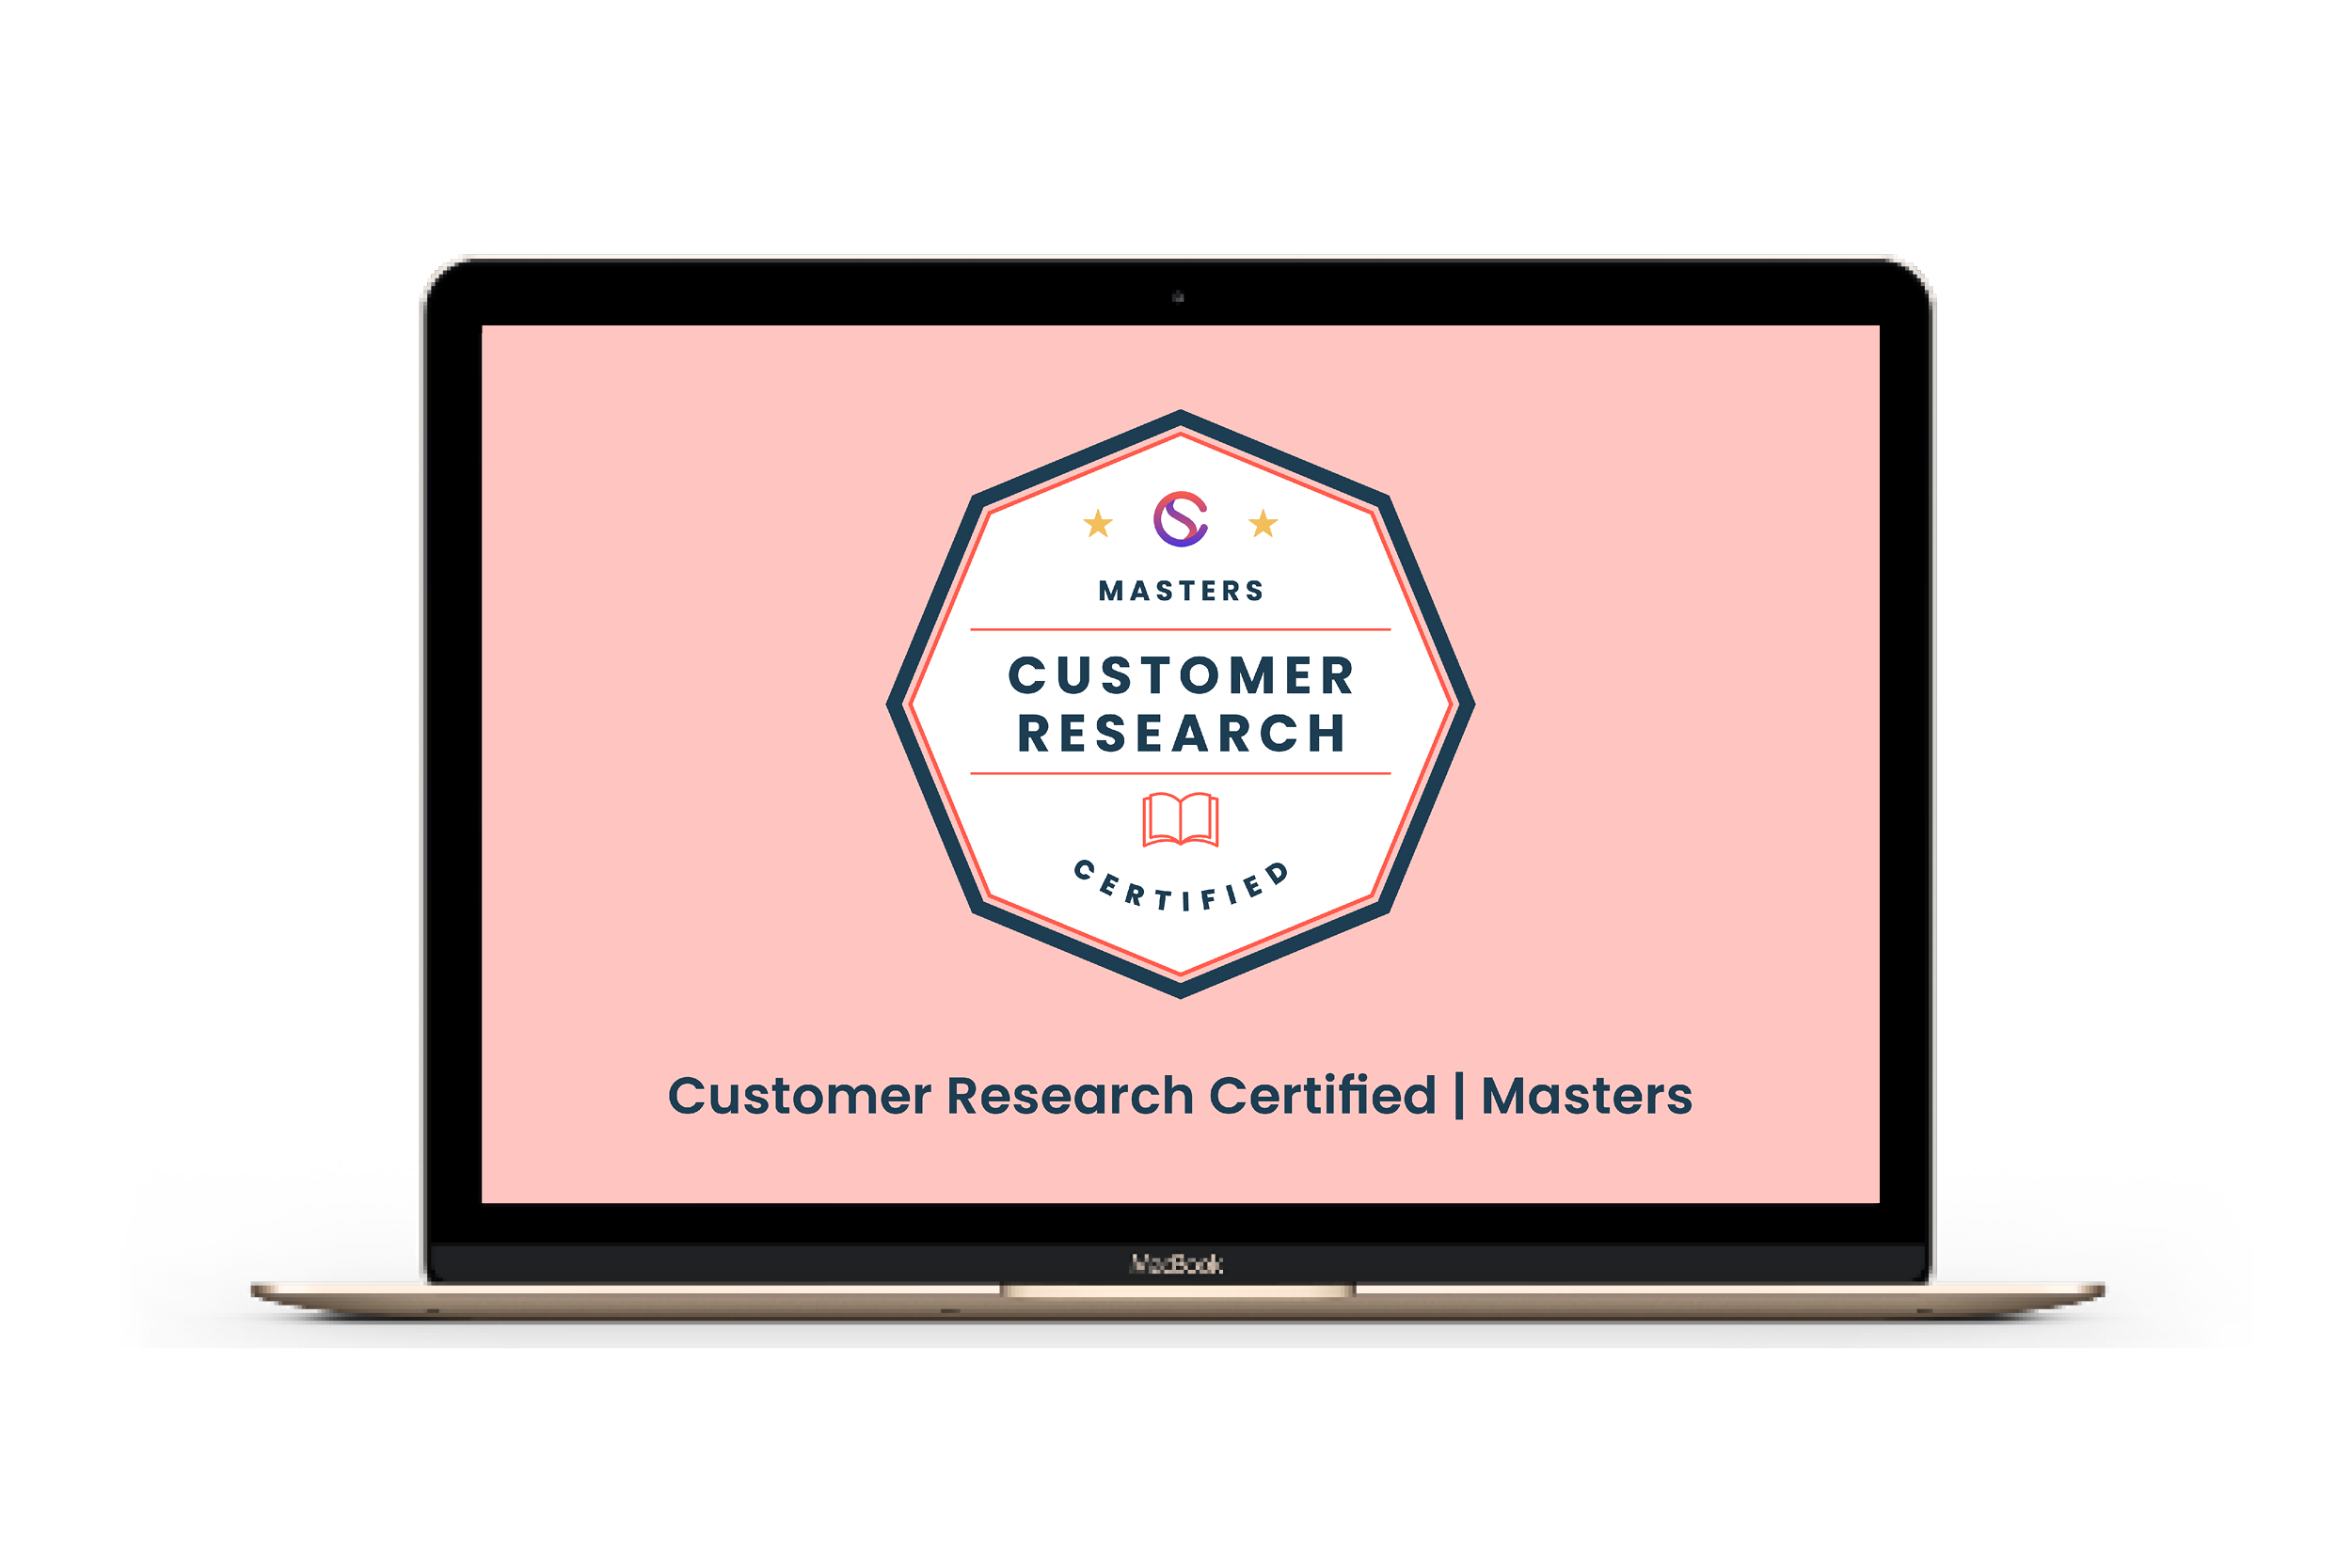 Customer Research Certified | Masters laptop image